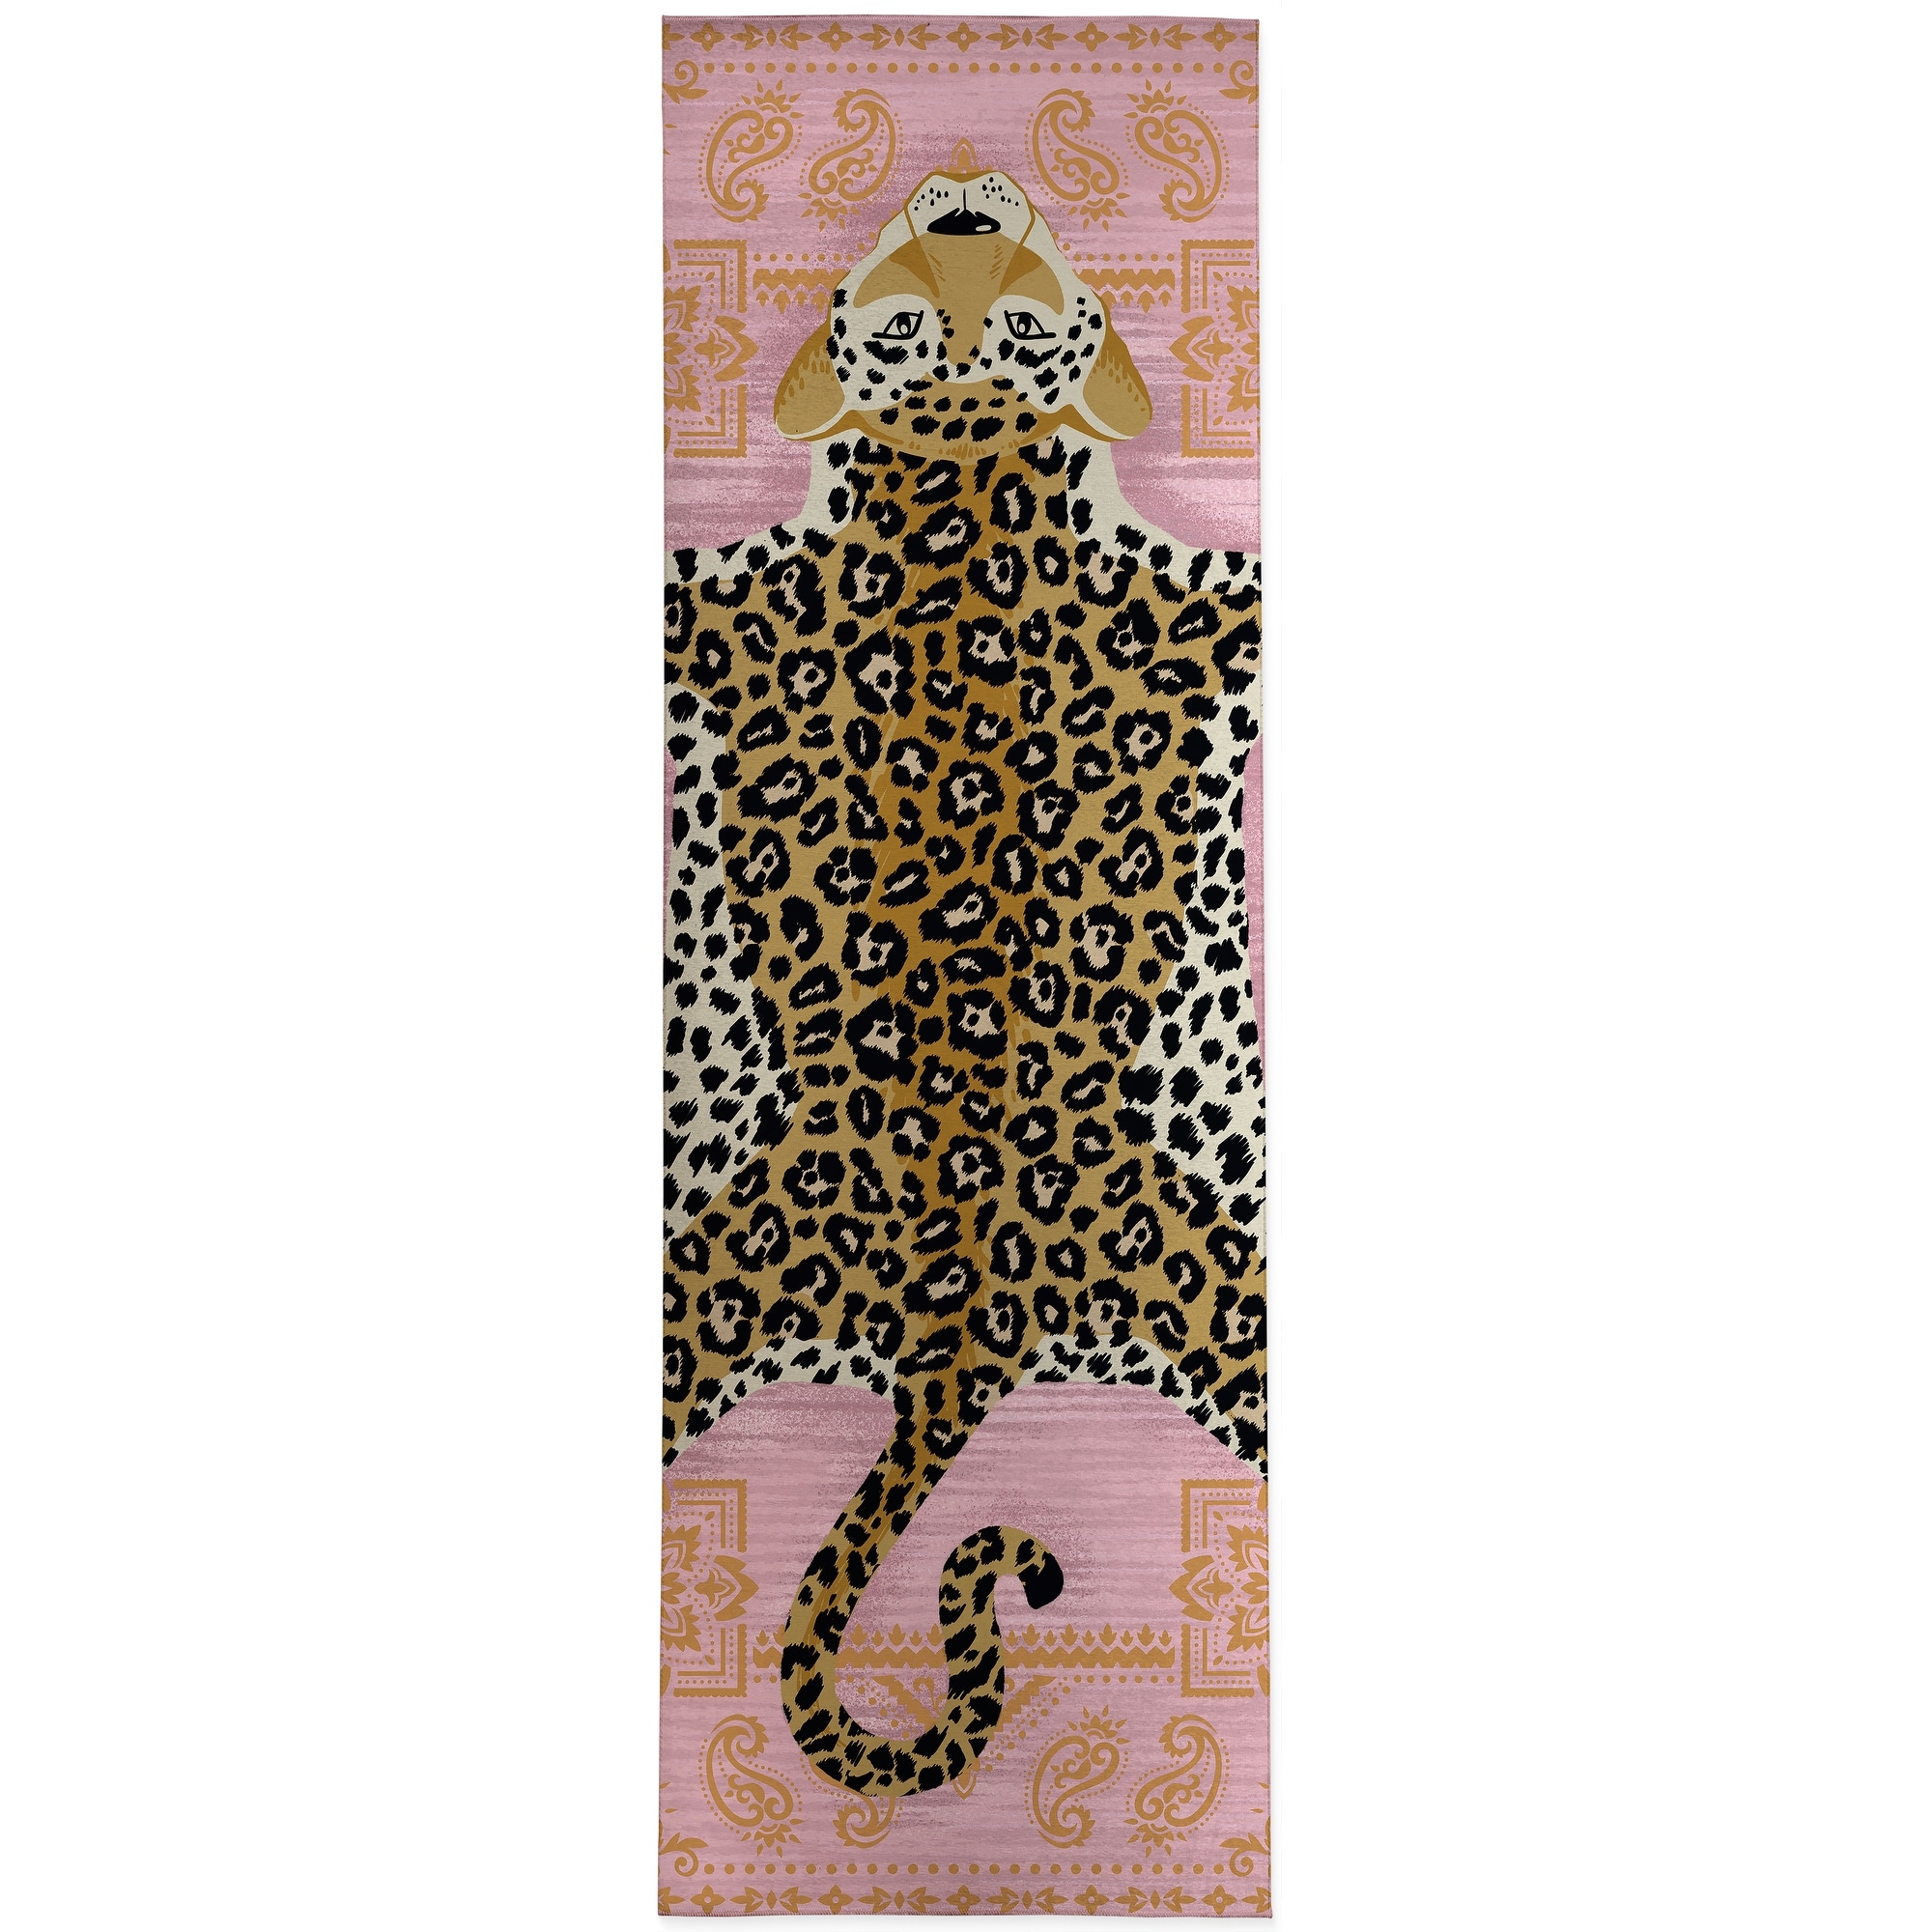 https://ak1.ostkcdn.com/images/products/is/images/direct/a3bbddcc2fa4df83a893c5478fe789e8f8051704/LEOPARD-RUG-PINK-Kitchen-Mat-By-Kavka-Designs.jpg